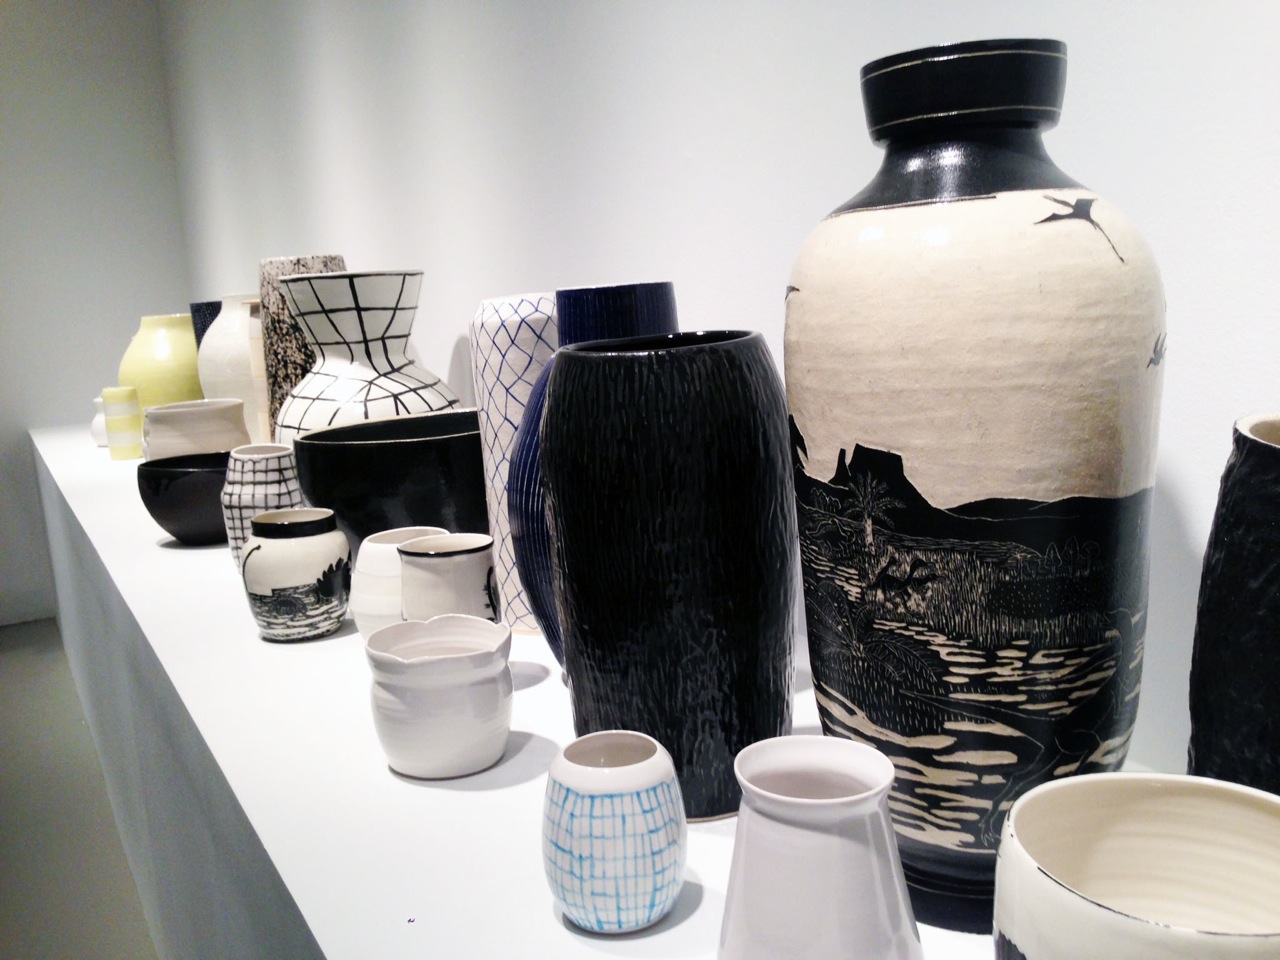 Shio Kusaka, Installation of ceramic pots, bowls, and vases (curated by Michelle Grabner)